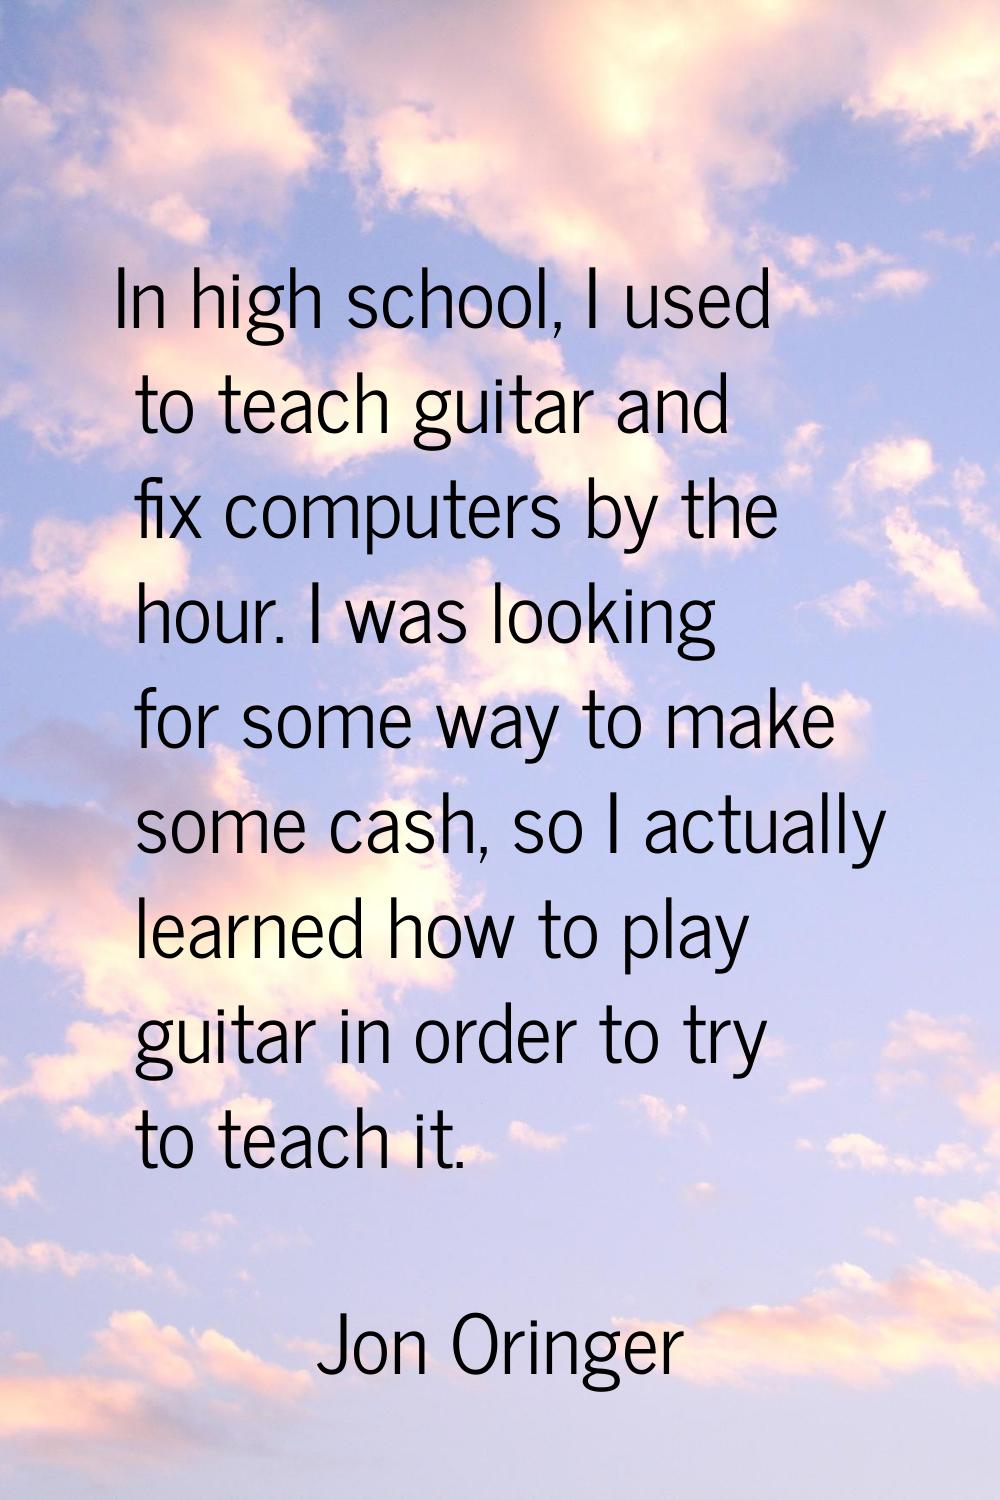 In high school, I used to teach guitar and fix computers by the hour. I was looking for some way to